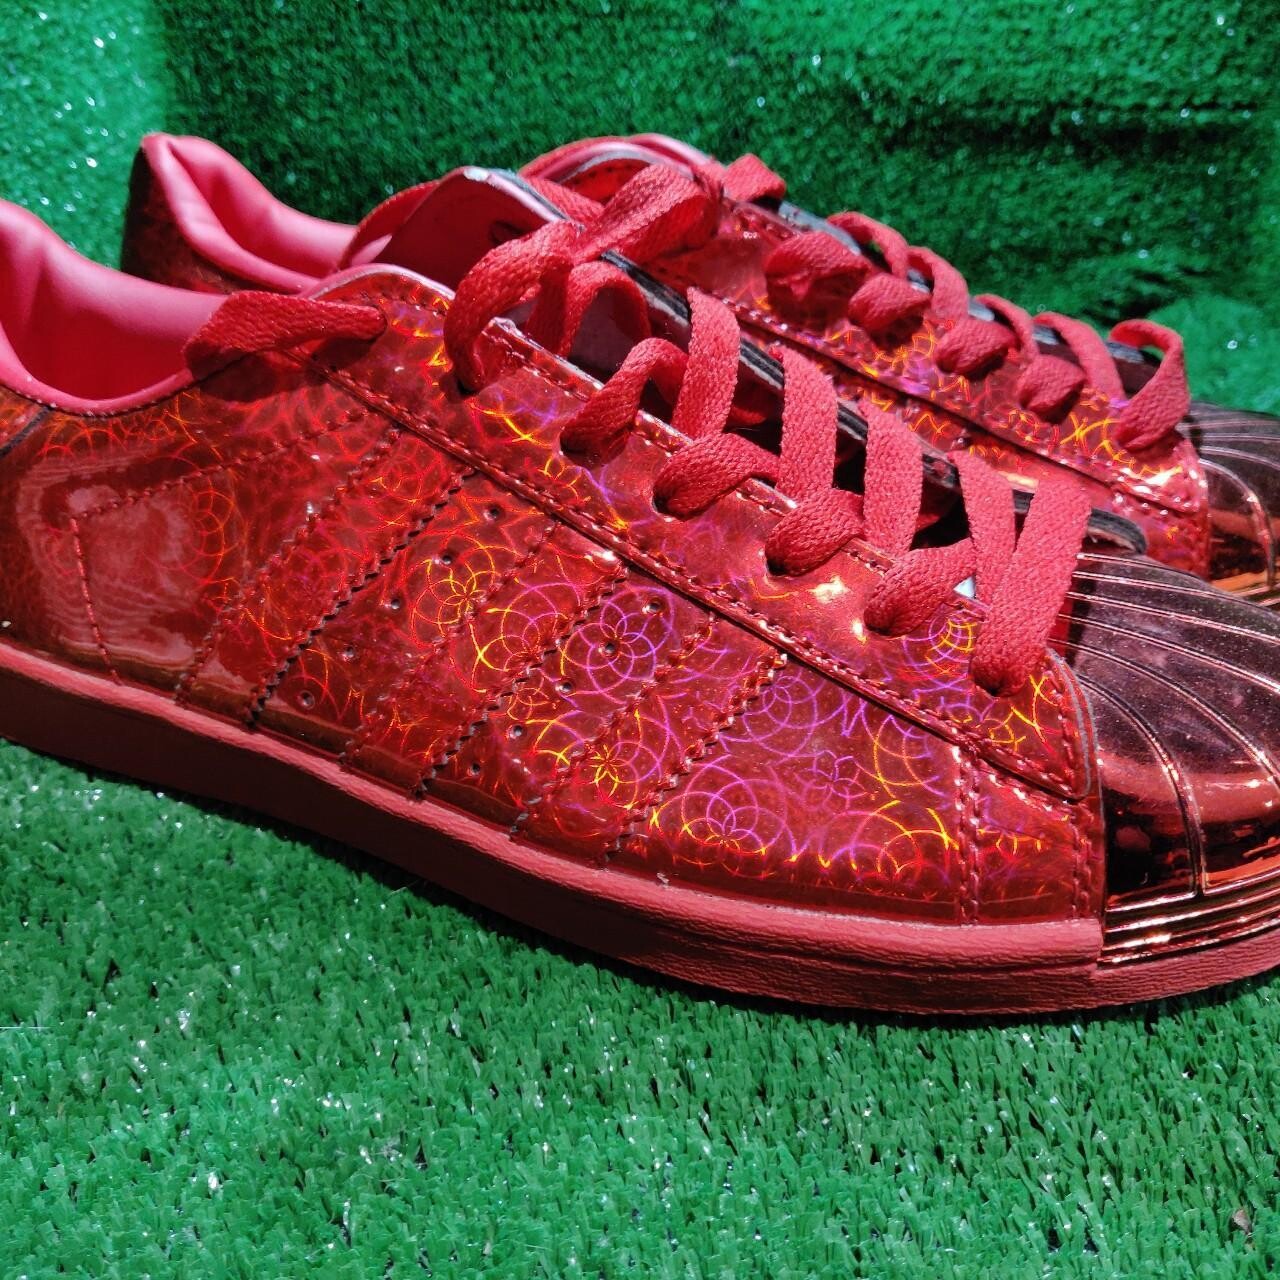 Adidas superstars holographic in red great unusual look in a UK 7.5